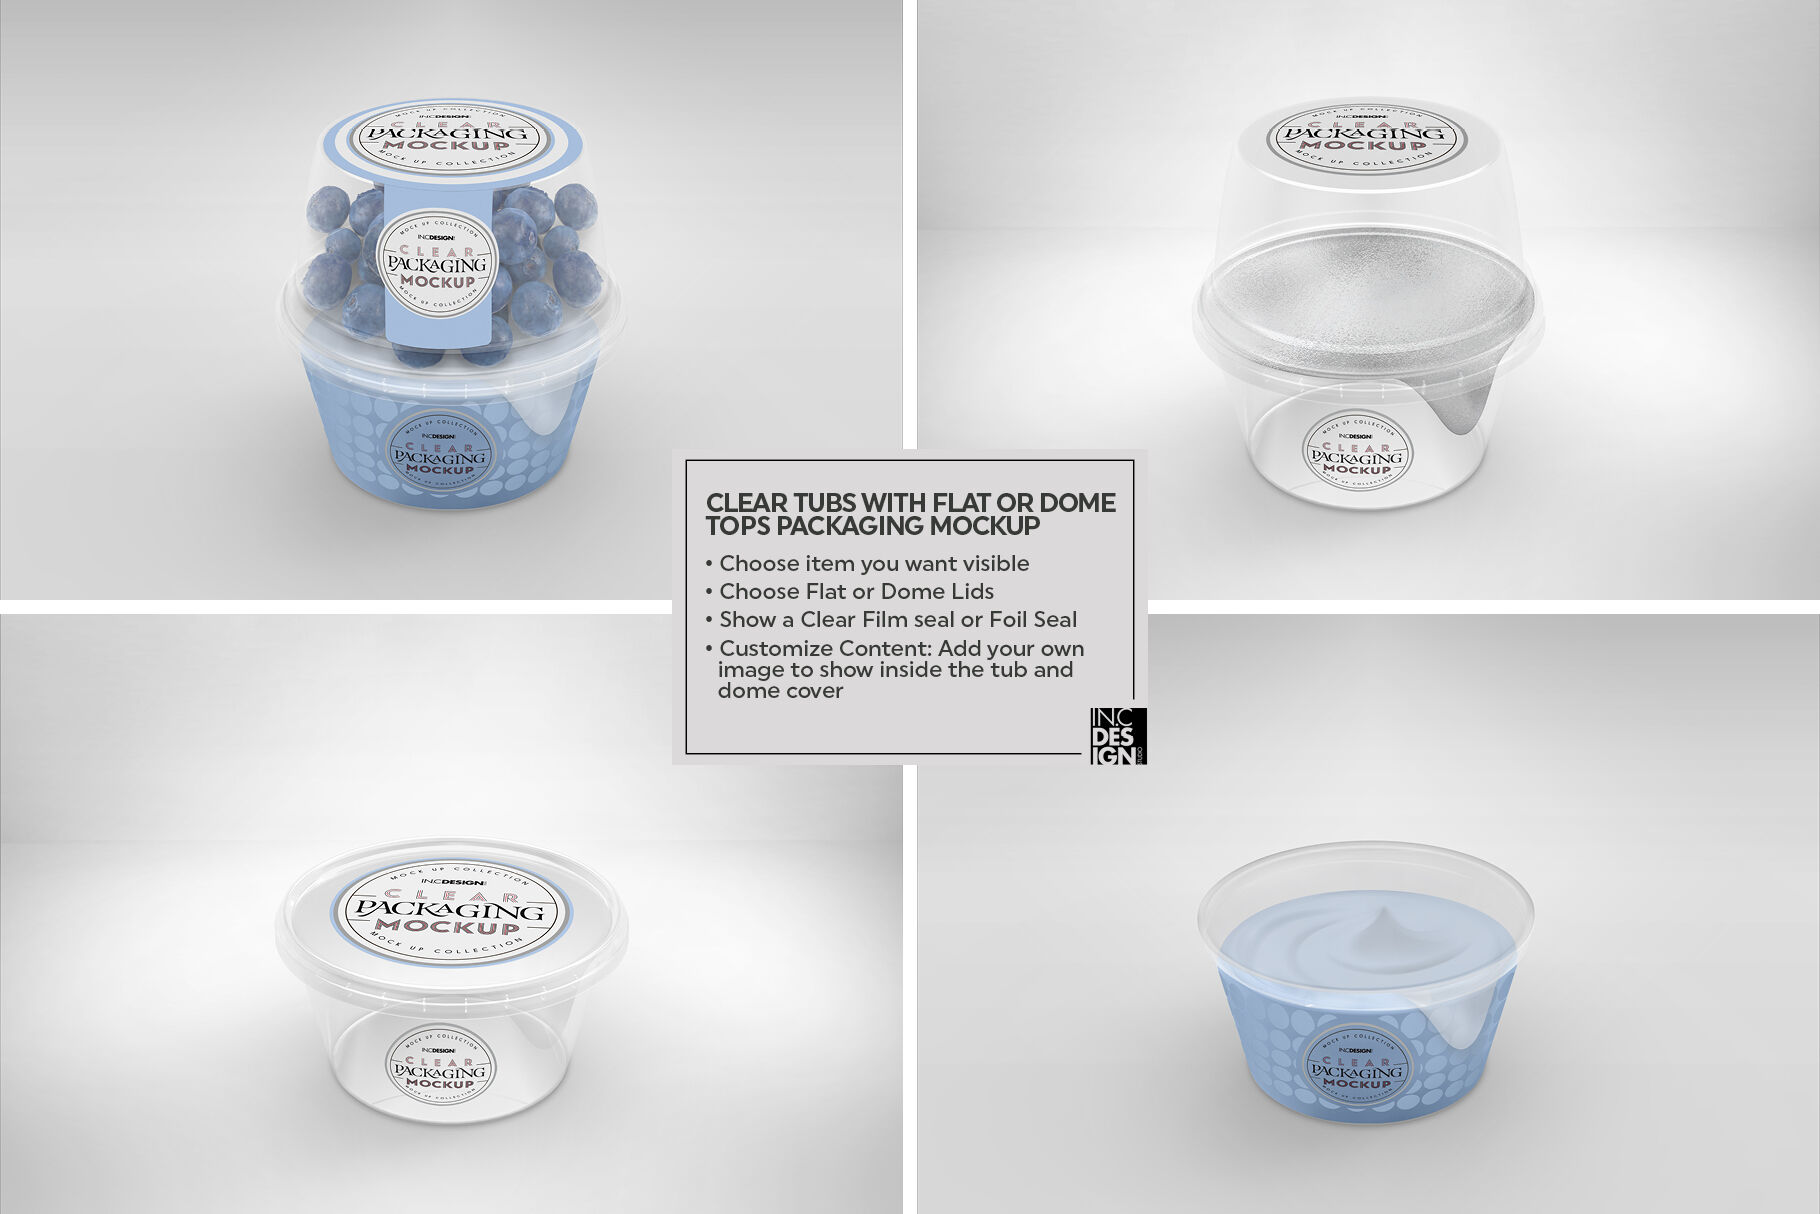 Clear Tubs with Flat or Dome Lid Packaging Mockup By INC Design Studio